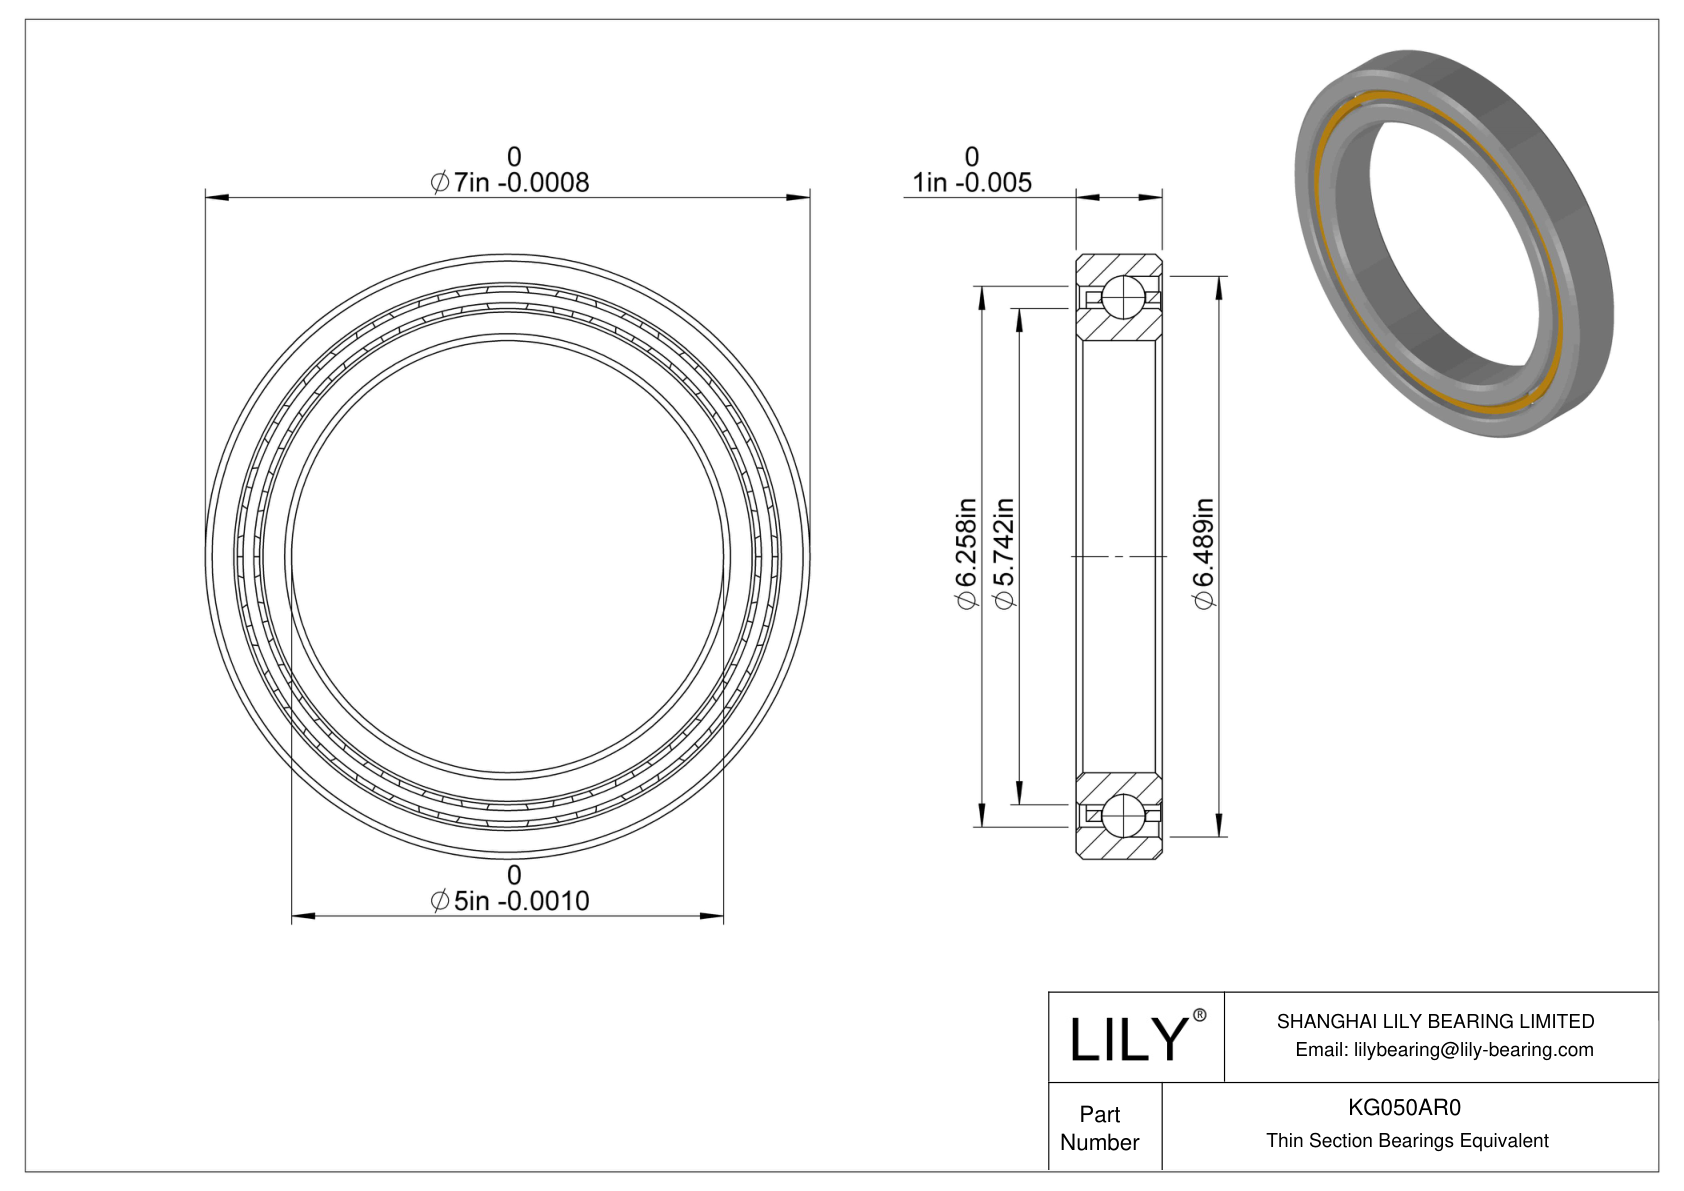 KG050AR0 Constant Section (CS) Bearings cad drawing